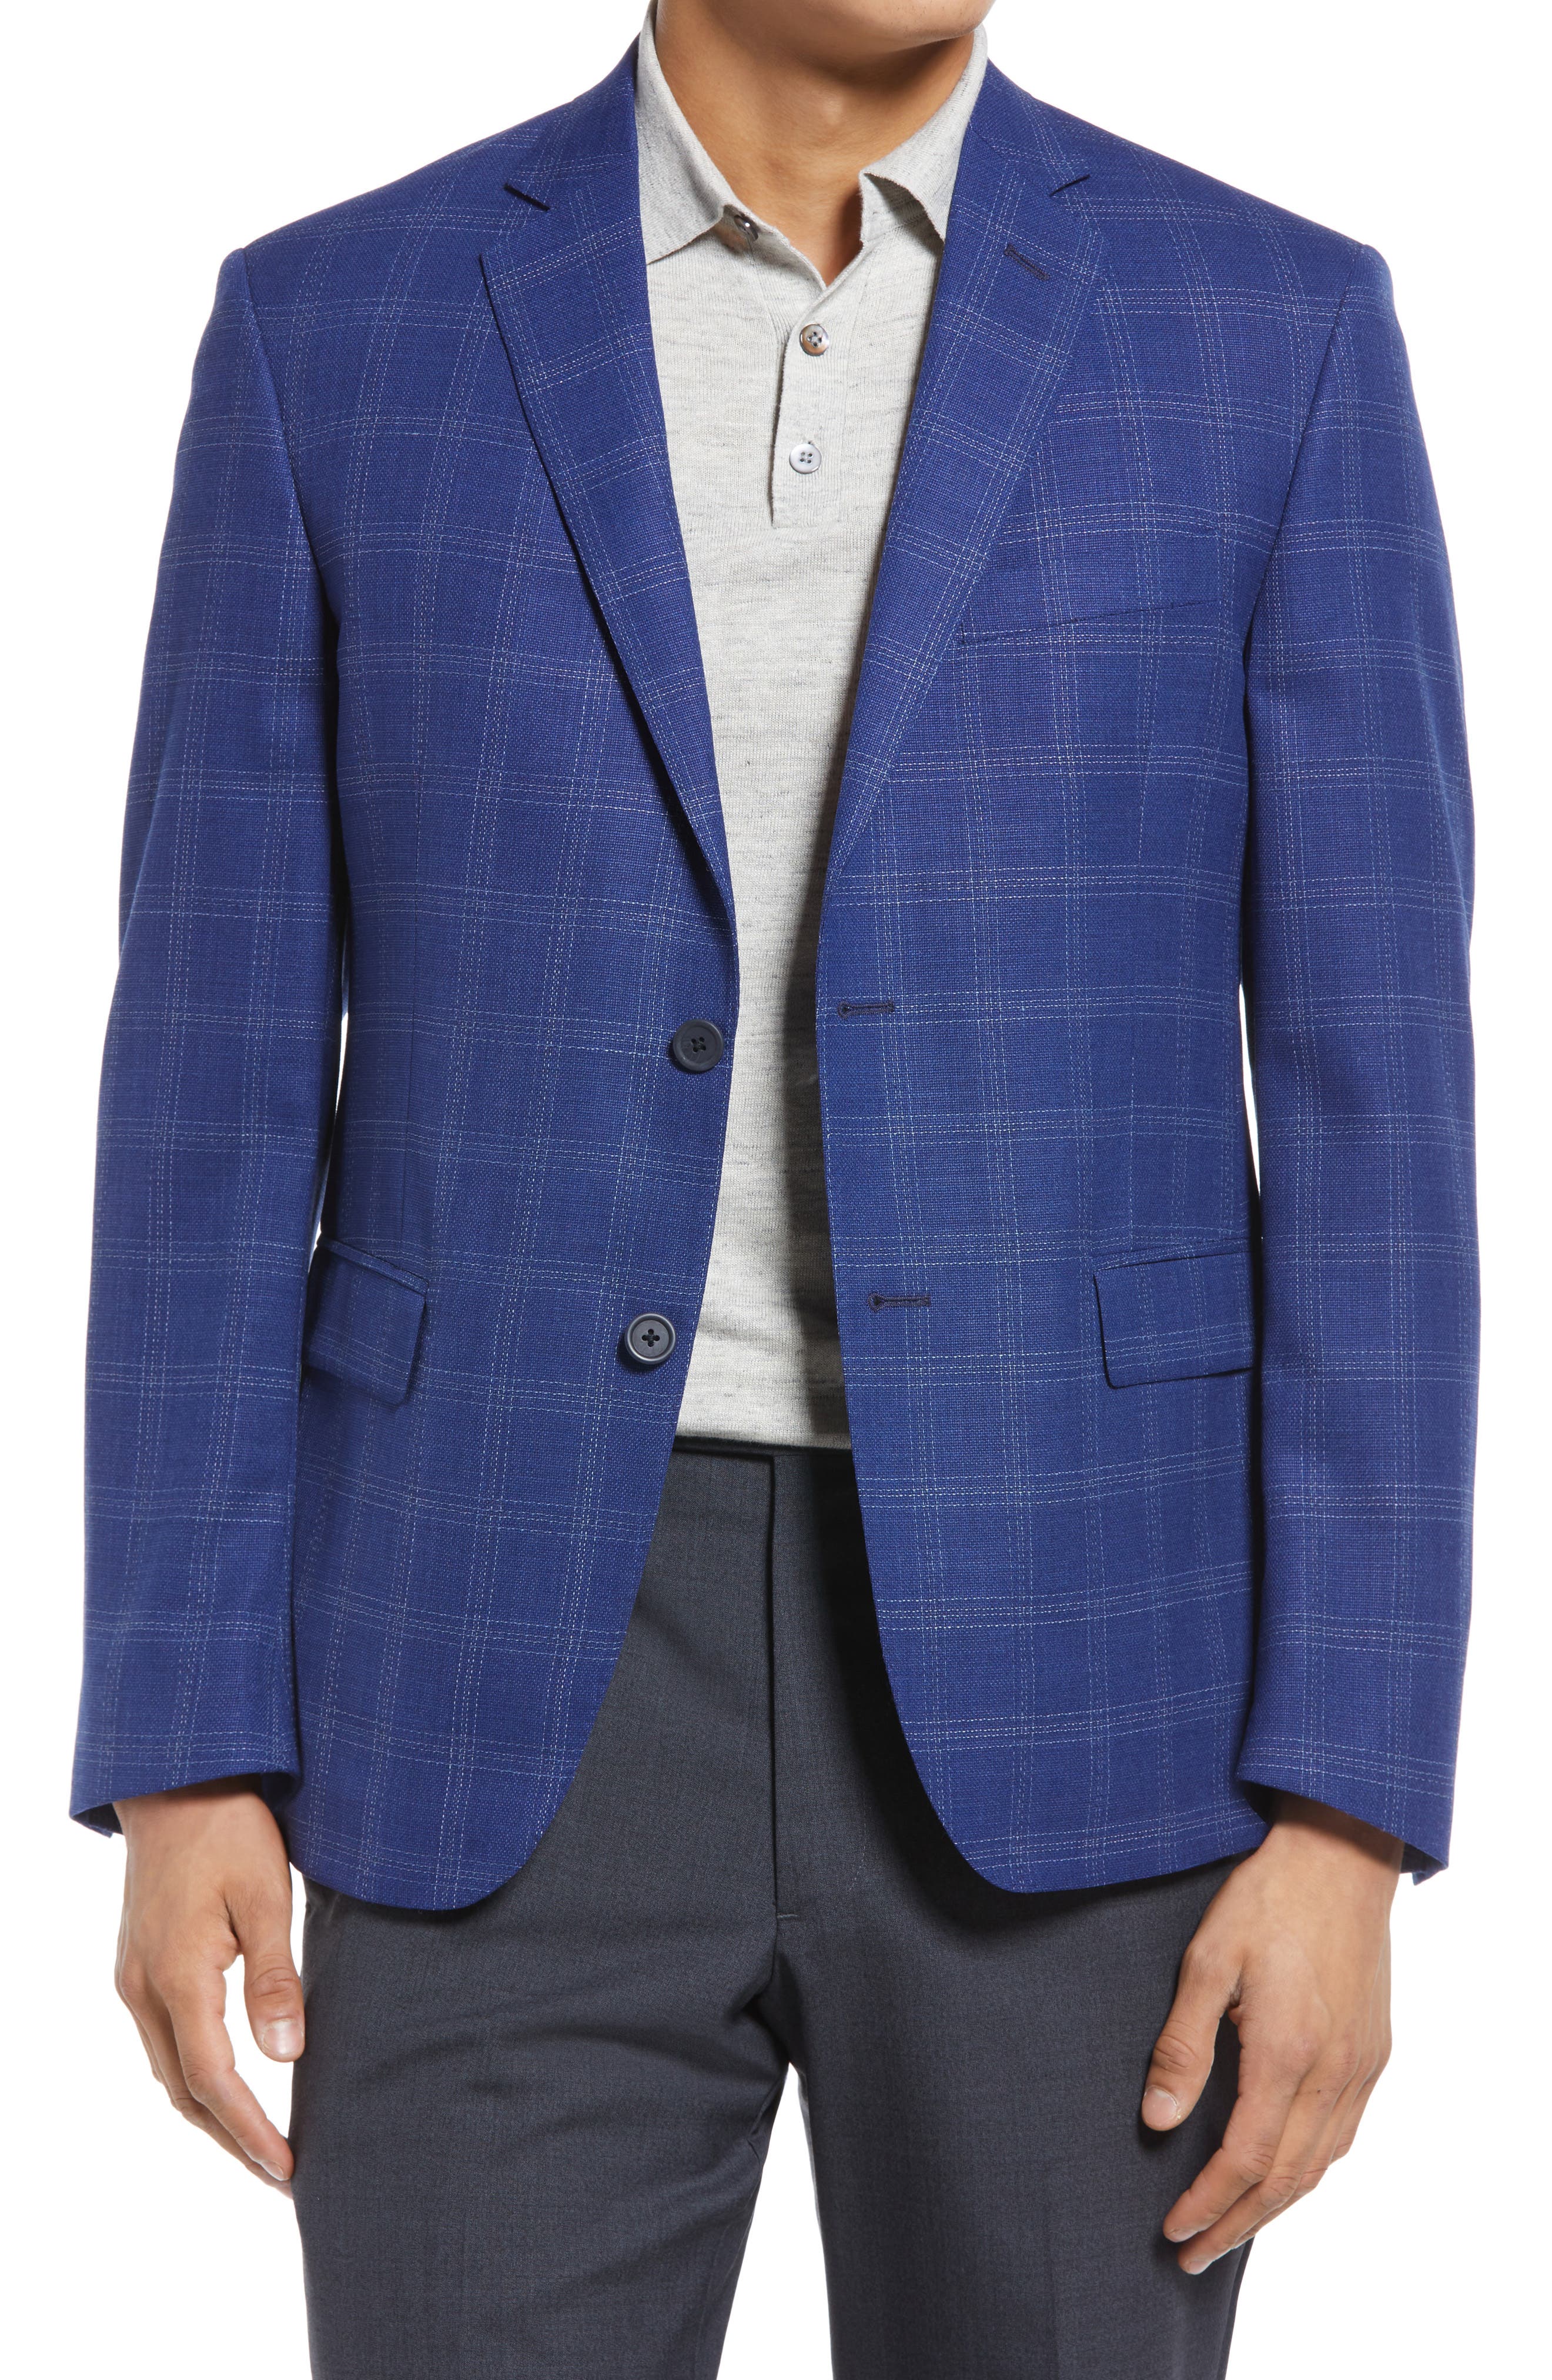 JB Britches Windowpane Wool Blend Sport Coat in Royal Blue at Nordstrom